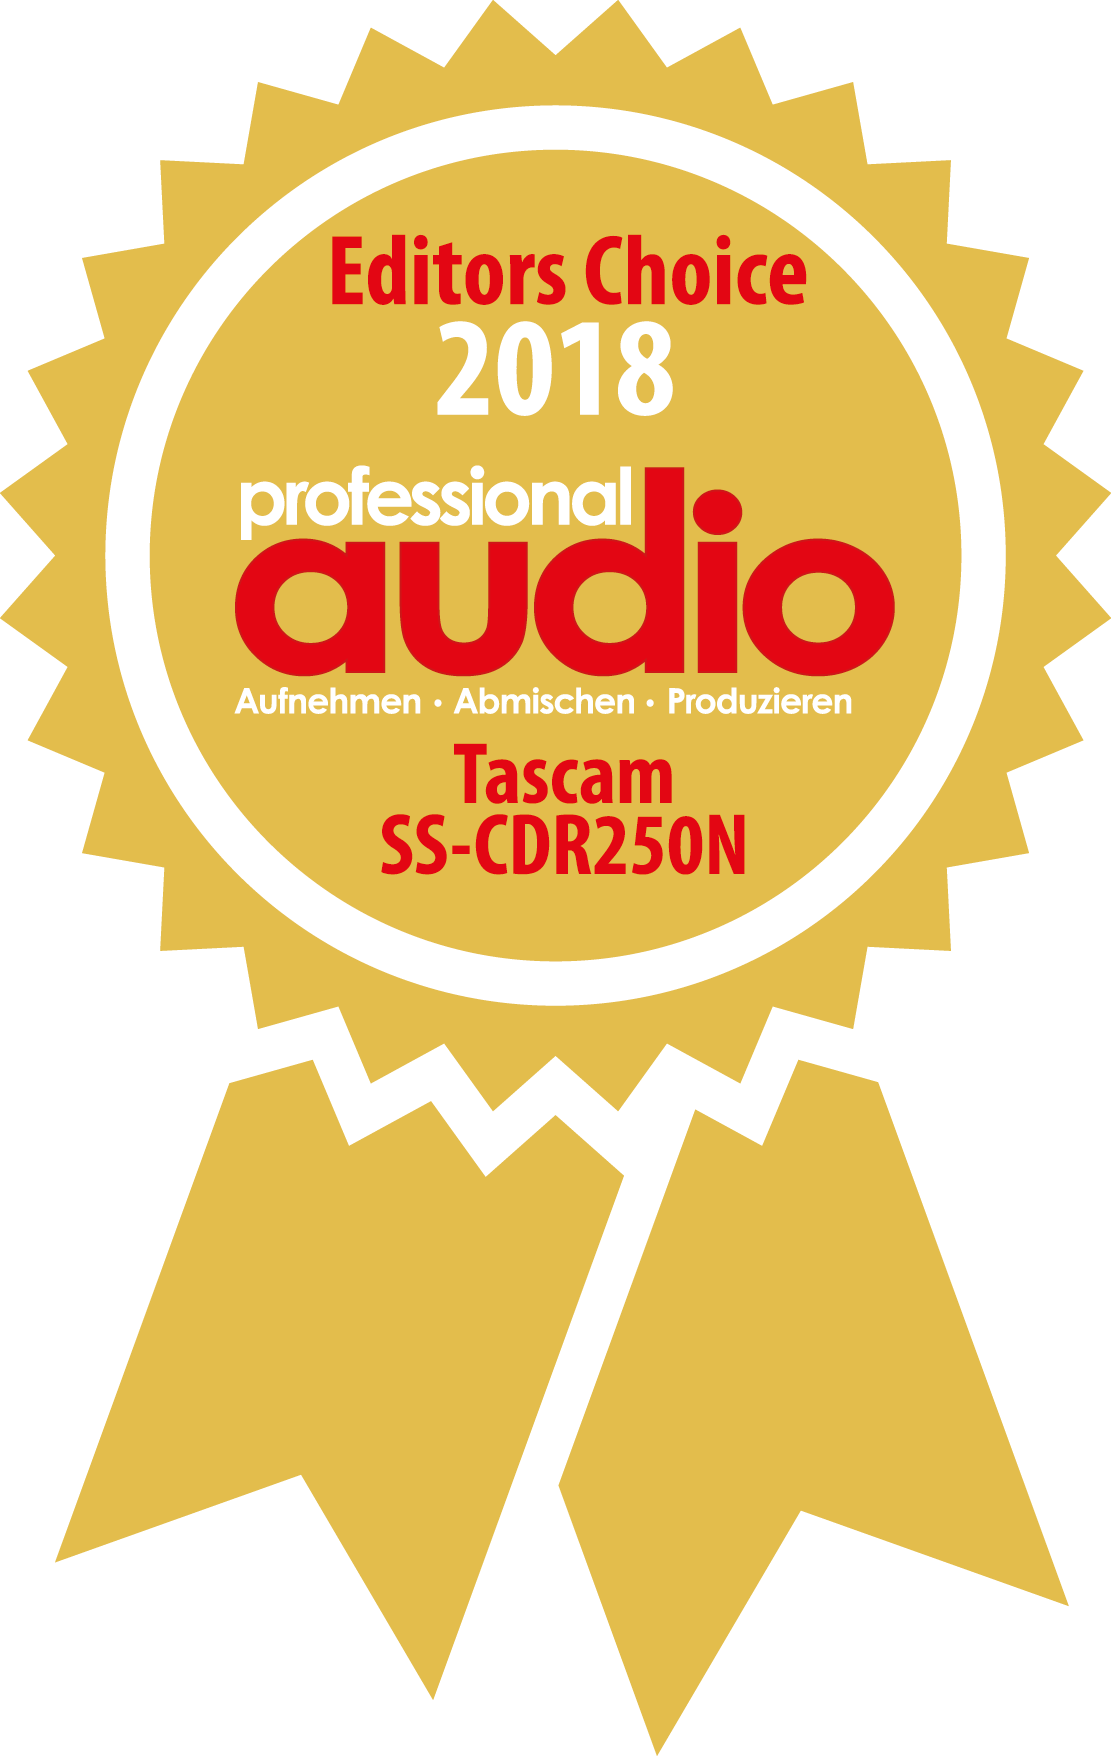 Tascam SS-CDR250 is Professional Audio’s “Editor’s Choice 2018”